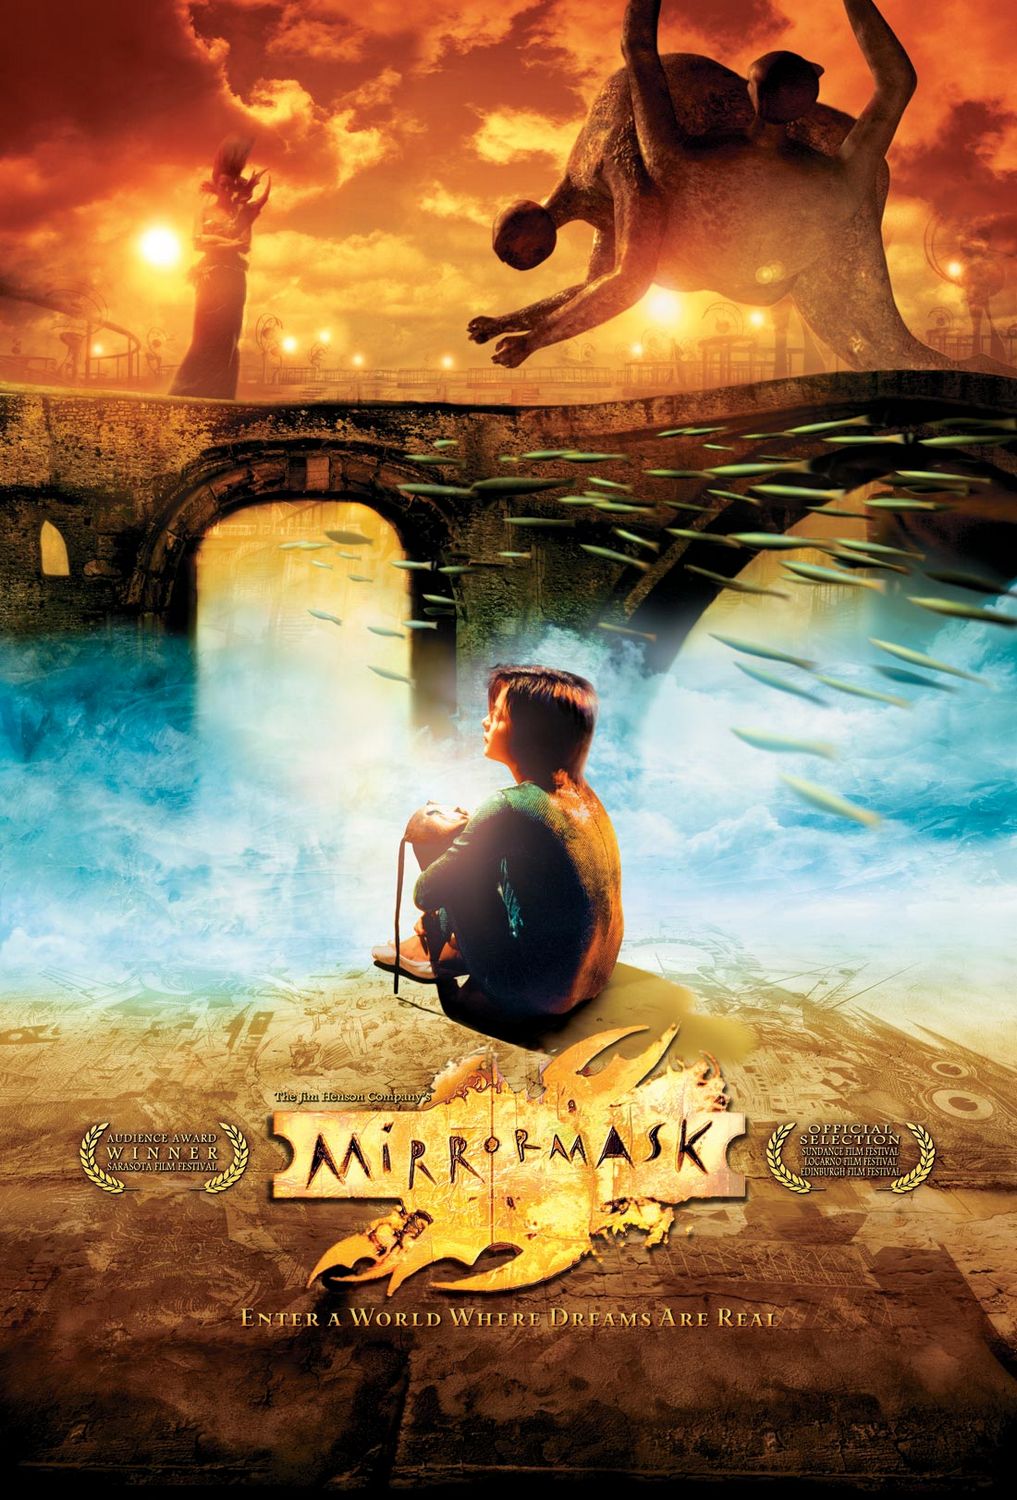 Extra Large Movie Poster Image for Mirrormask 